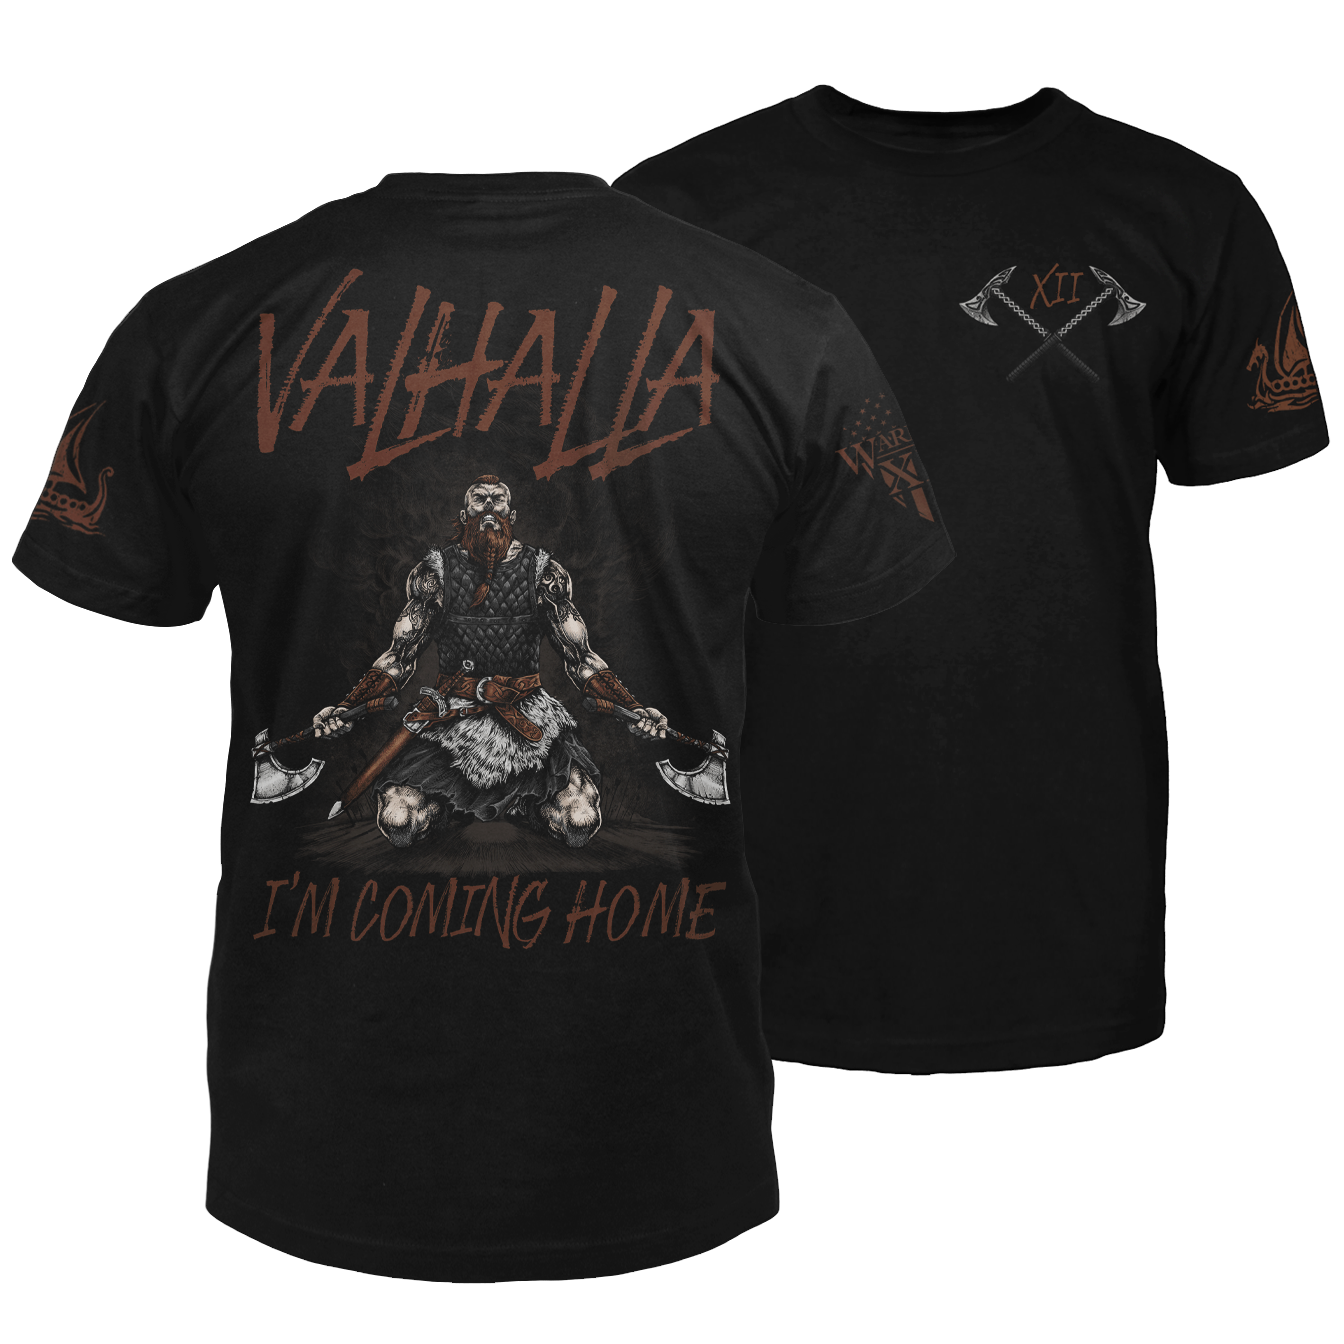 The front and back of a black t-shirt. The back features a viking warrior on his knees, looking up at the sky, with an axe in each hand with the words "Valhalla I'm coming home." The front has a small pocket image of two crossed axes.